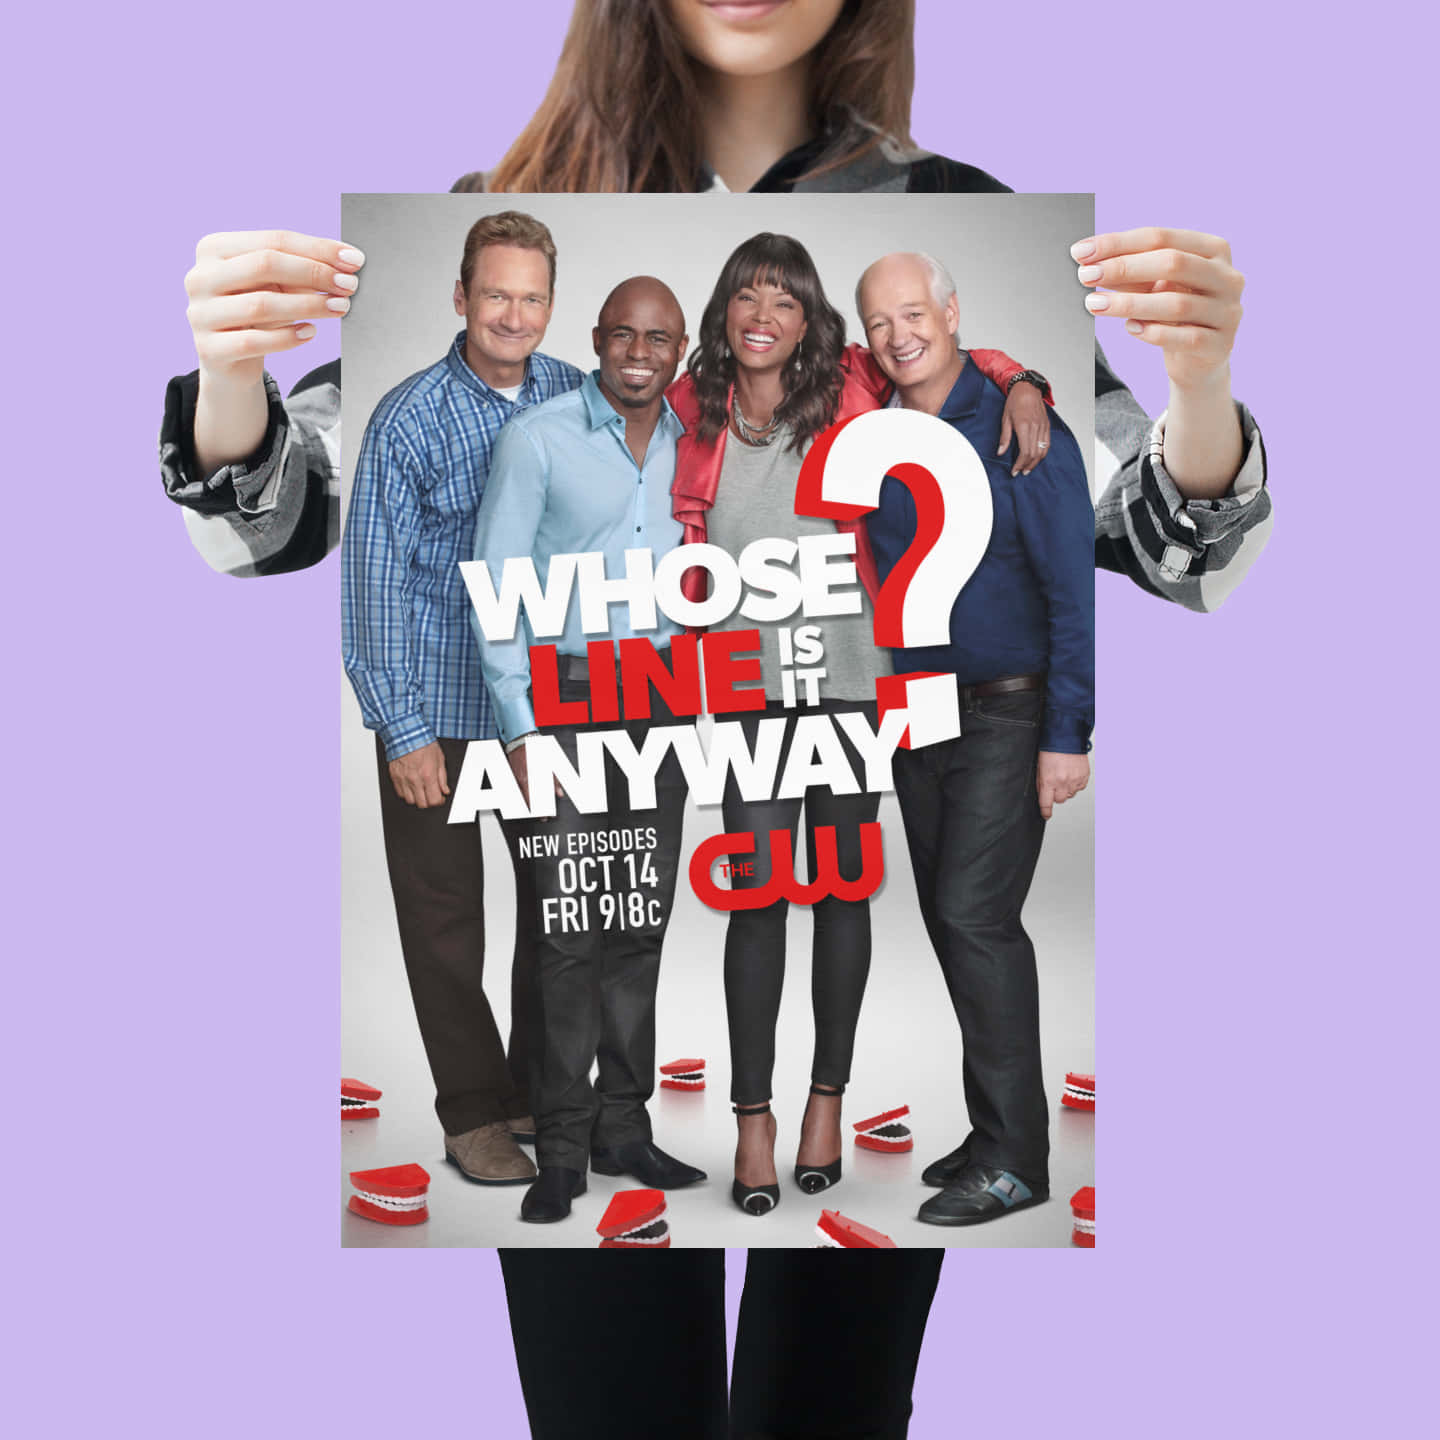 Ryan Stiles Whose Line Anyway Poster Wallpaper